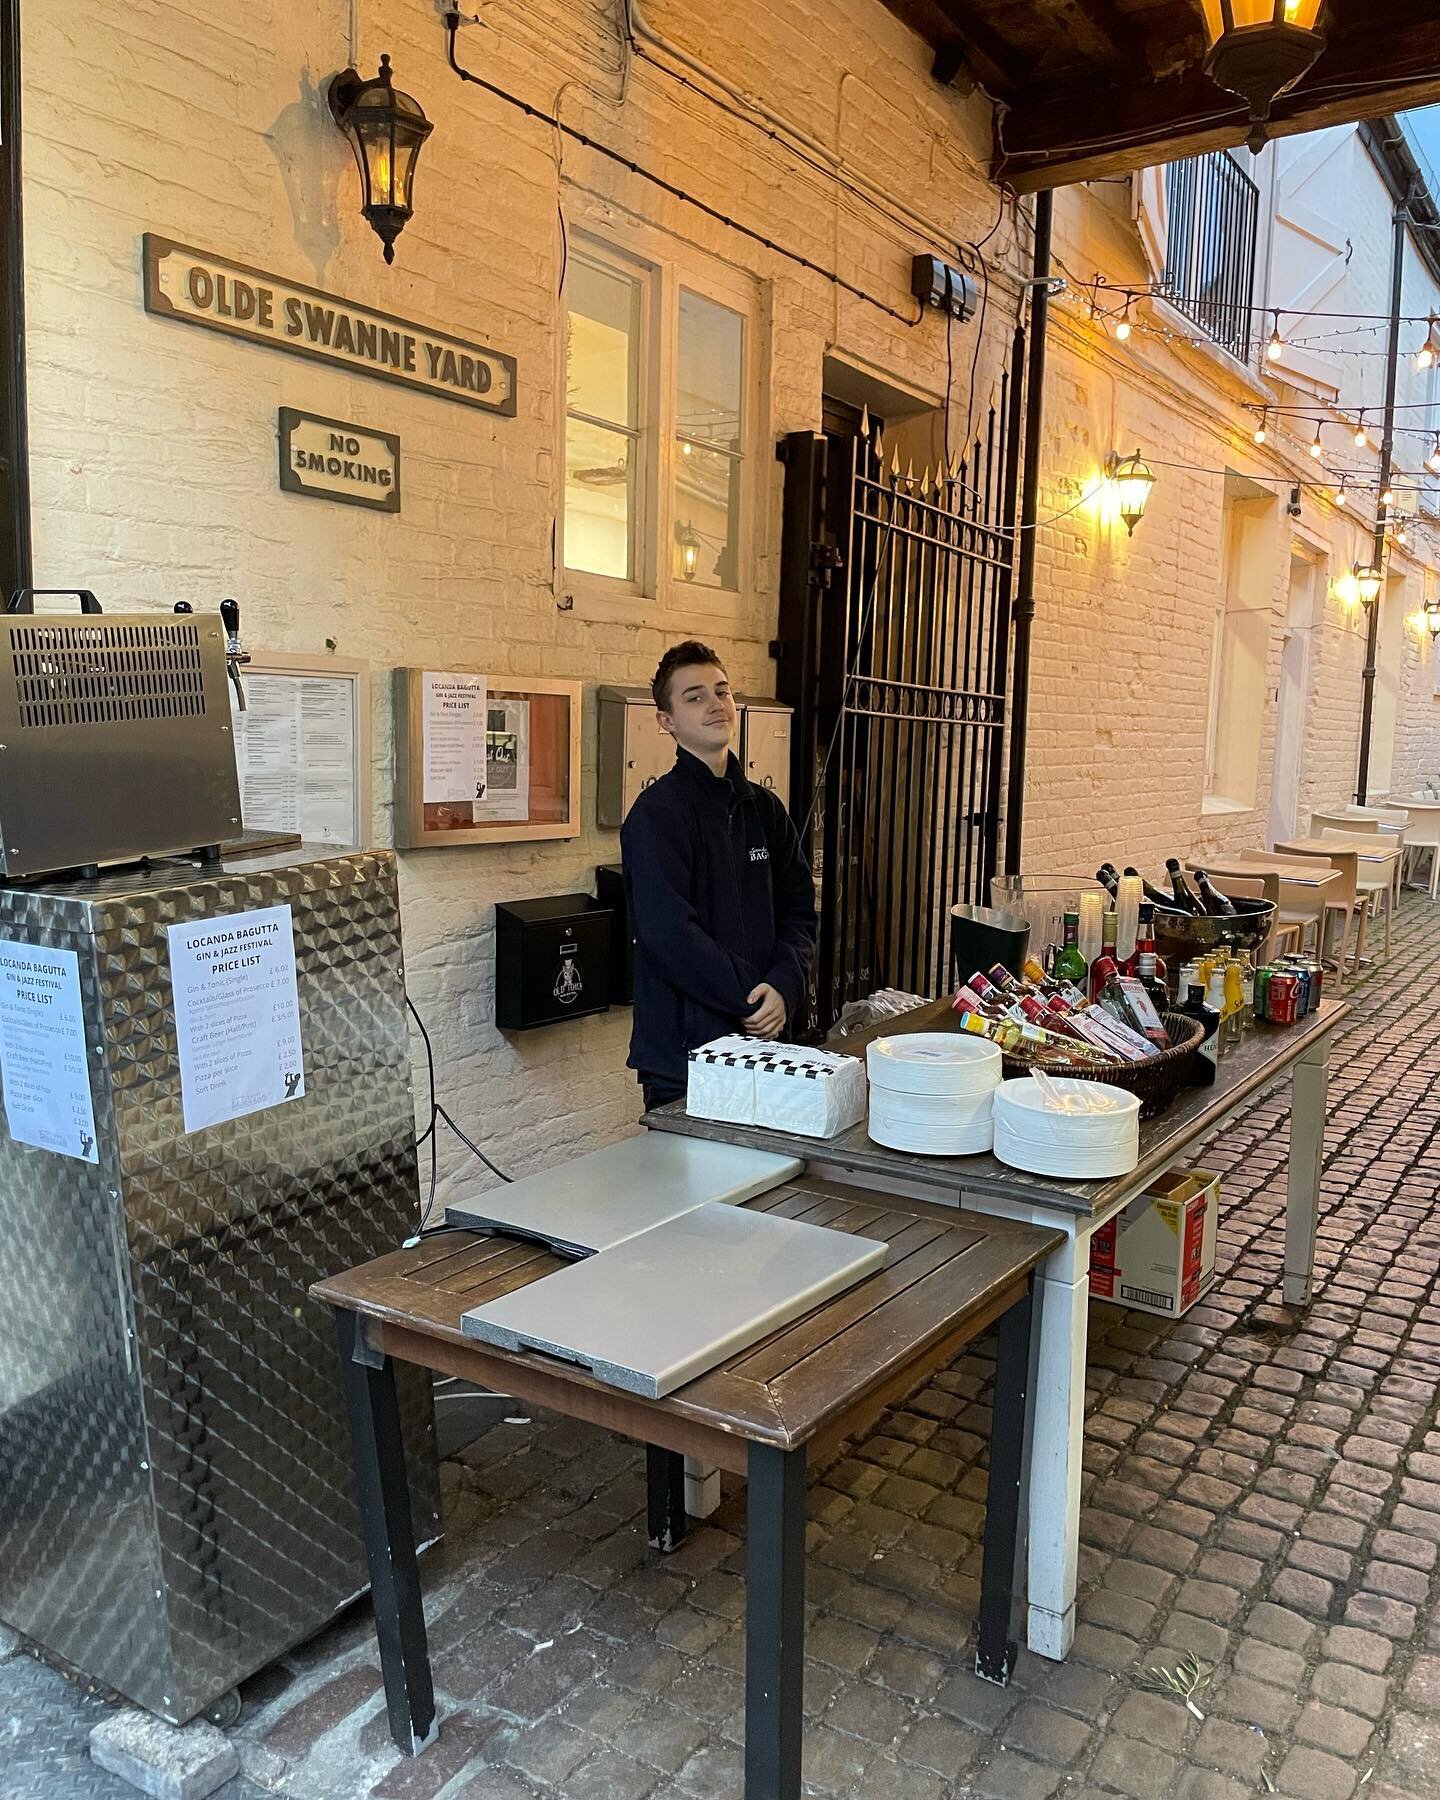 Here is one of our amazing team at our stand having just helped set up for the gin and jazz festival!  This was the calm before the storm! 
😜
What a night! It poured with rain and we thought it was going to be a wash out!
😳
But the rain stopped and